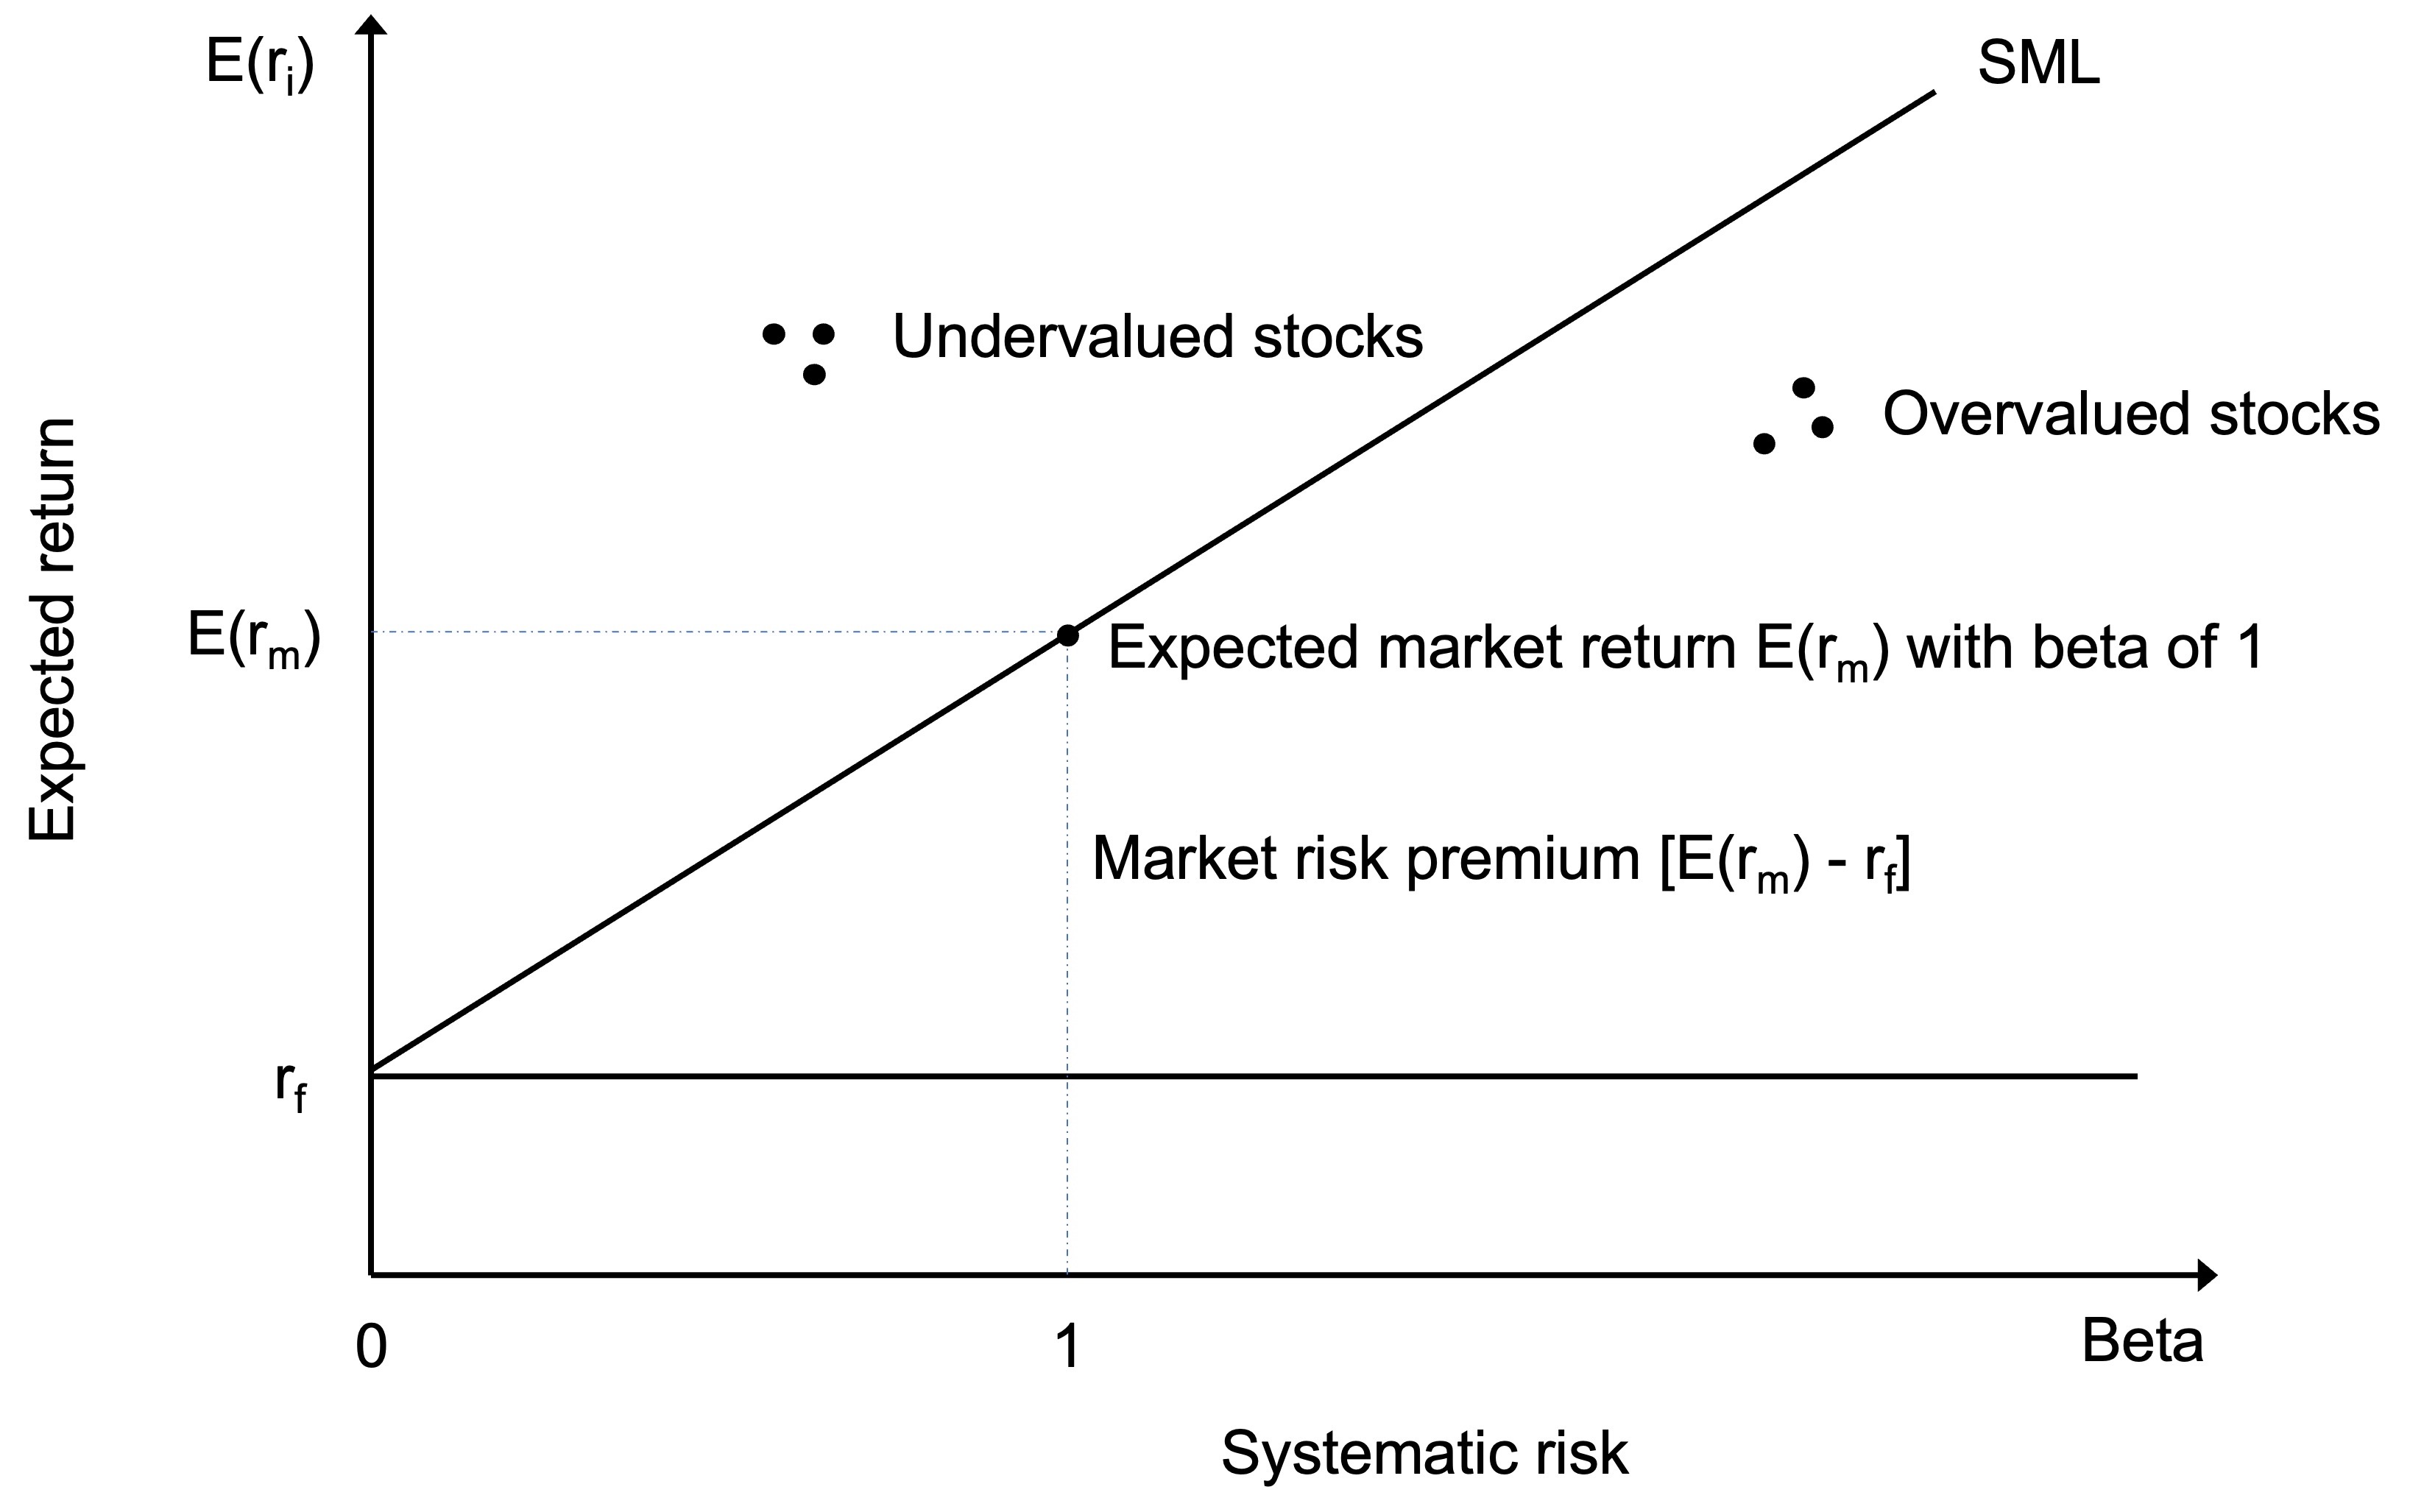 Graphically depicting the Capital Asset Pricing Model using the security market line 